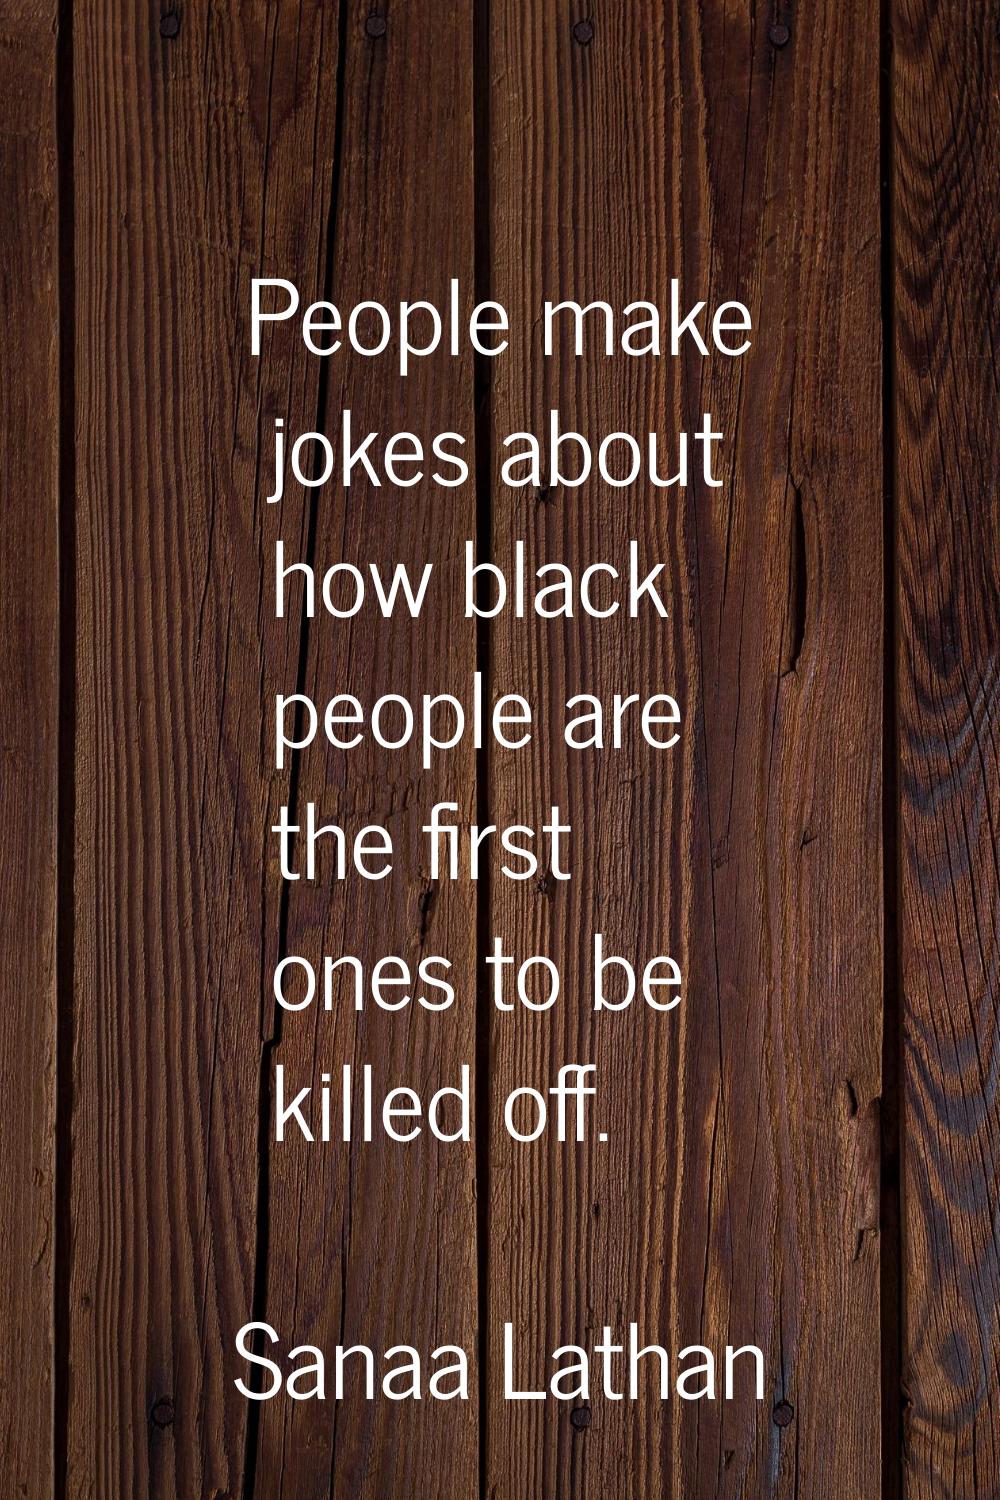 People make jokes about how black people are the first ones to be killed off.